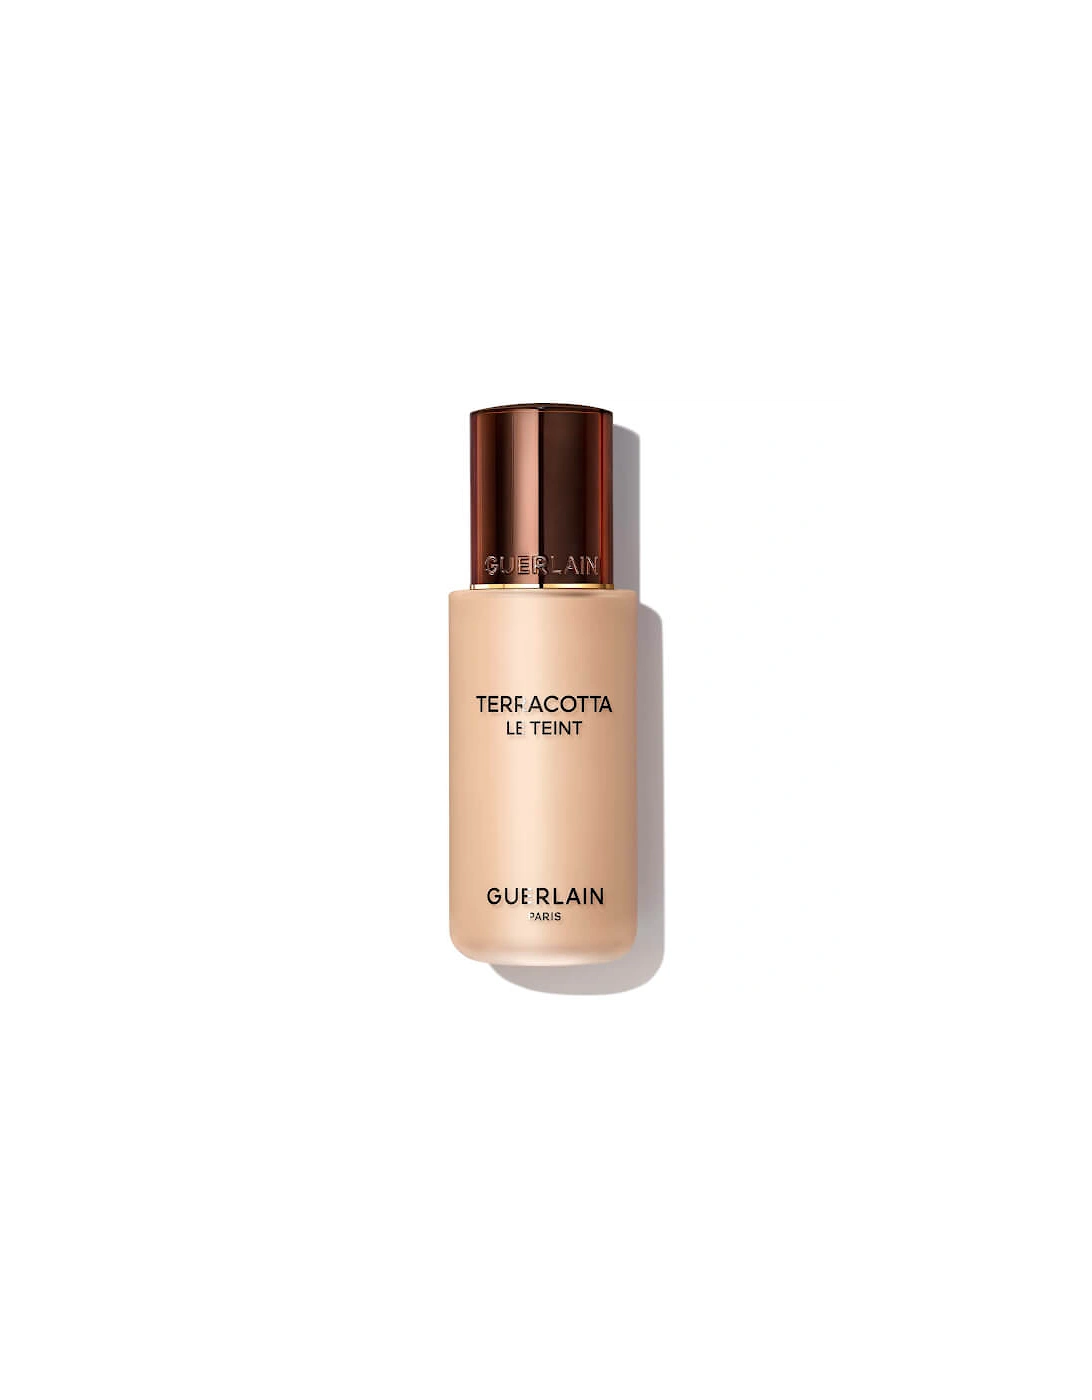 Terracotta Le Teint Healthy Glow Natural Perfection Foundation - 2.5N, 2 of 1